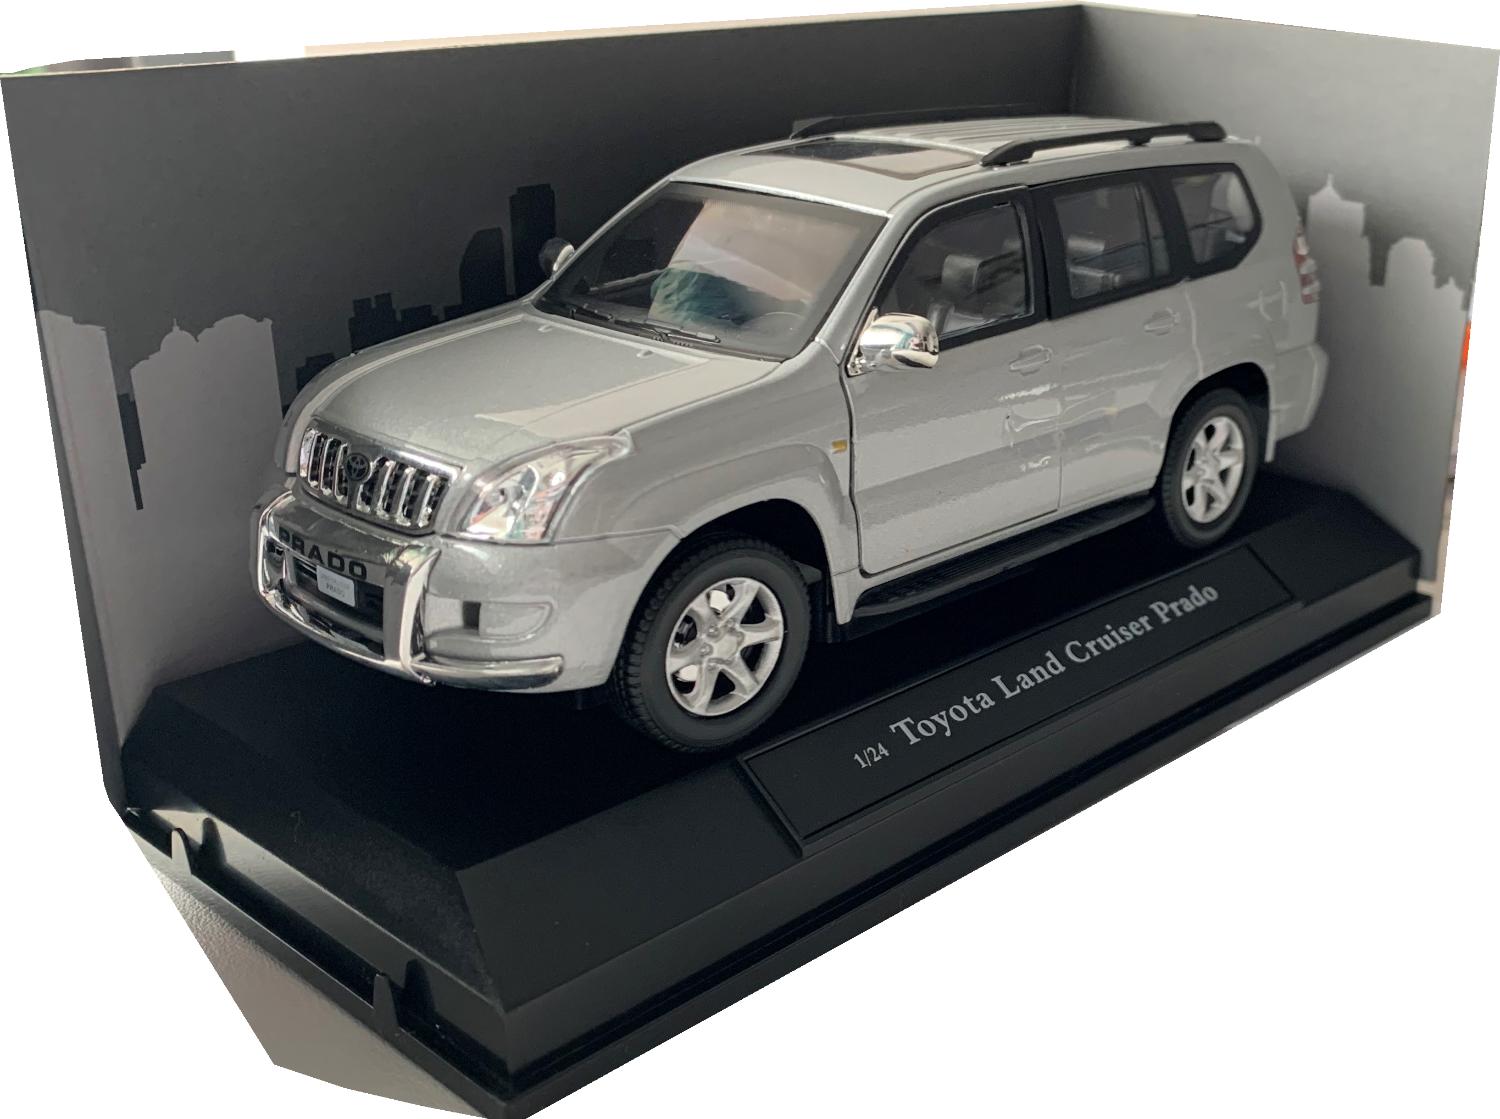 A very good scale model of a Toyota Land Cruiser Prado decorated in silver with sunroof, roof rails, spare wheel on rear door